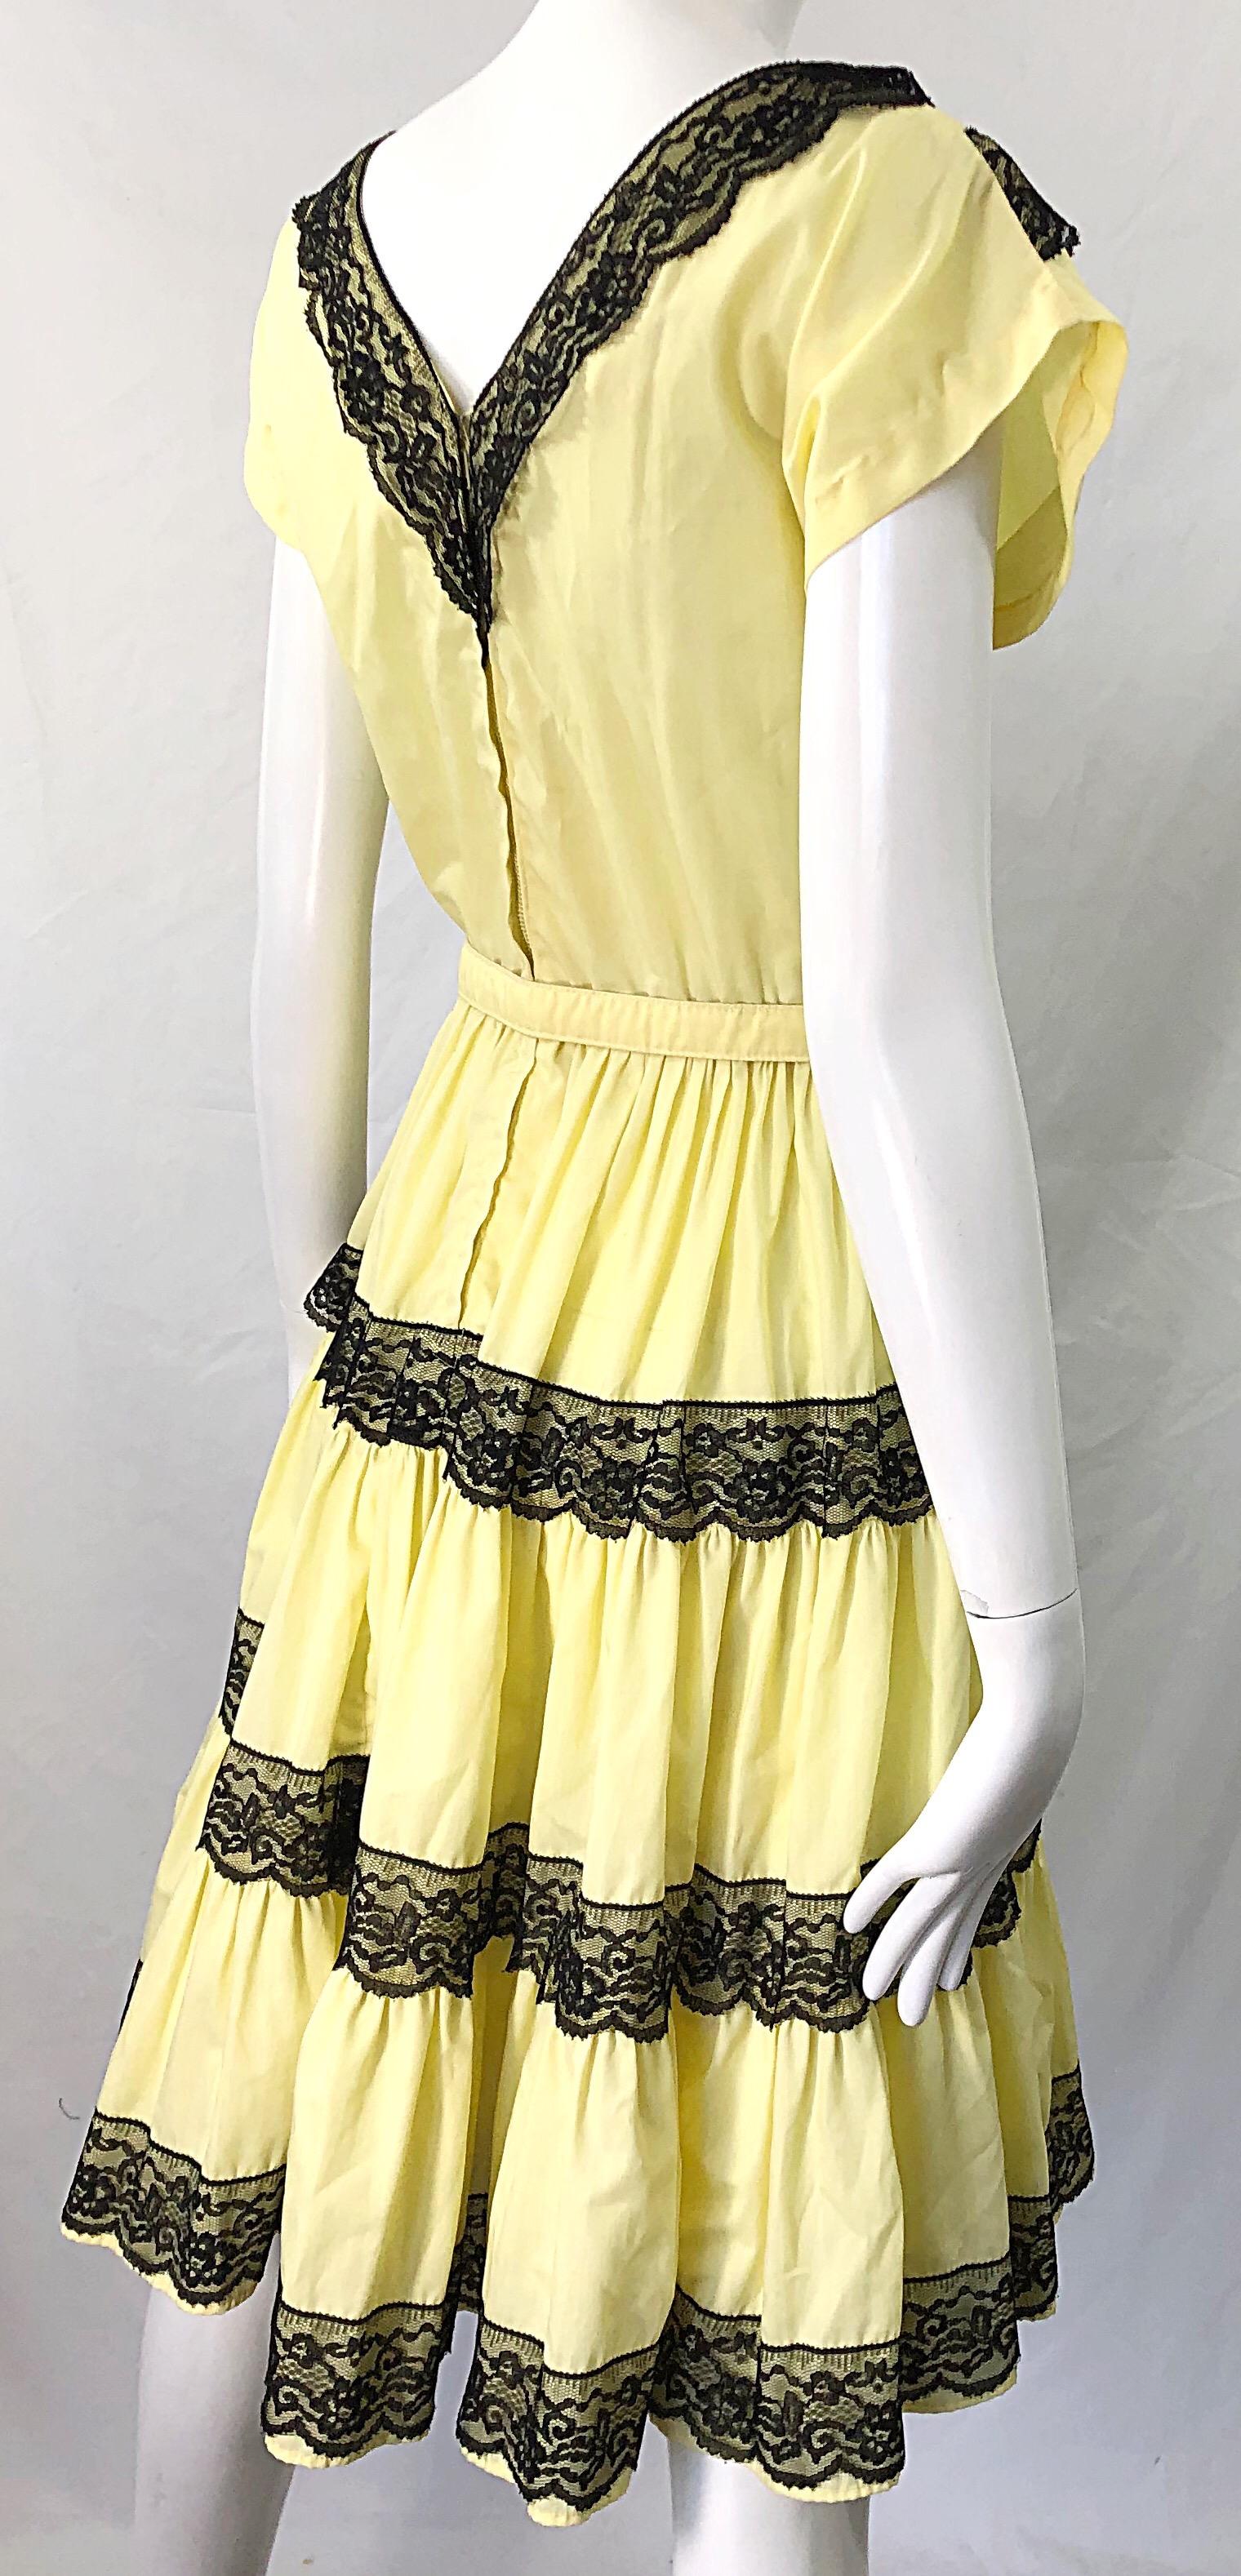 1950s Bettina of Miami Yellow + Black Cotton Lace Fit n' Flare Vintage 50s Dress For Sale 7